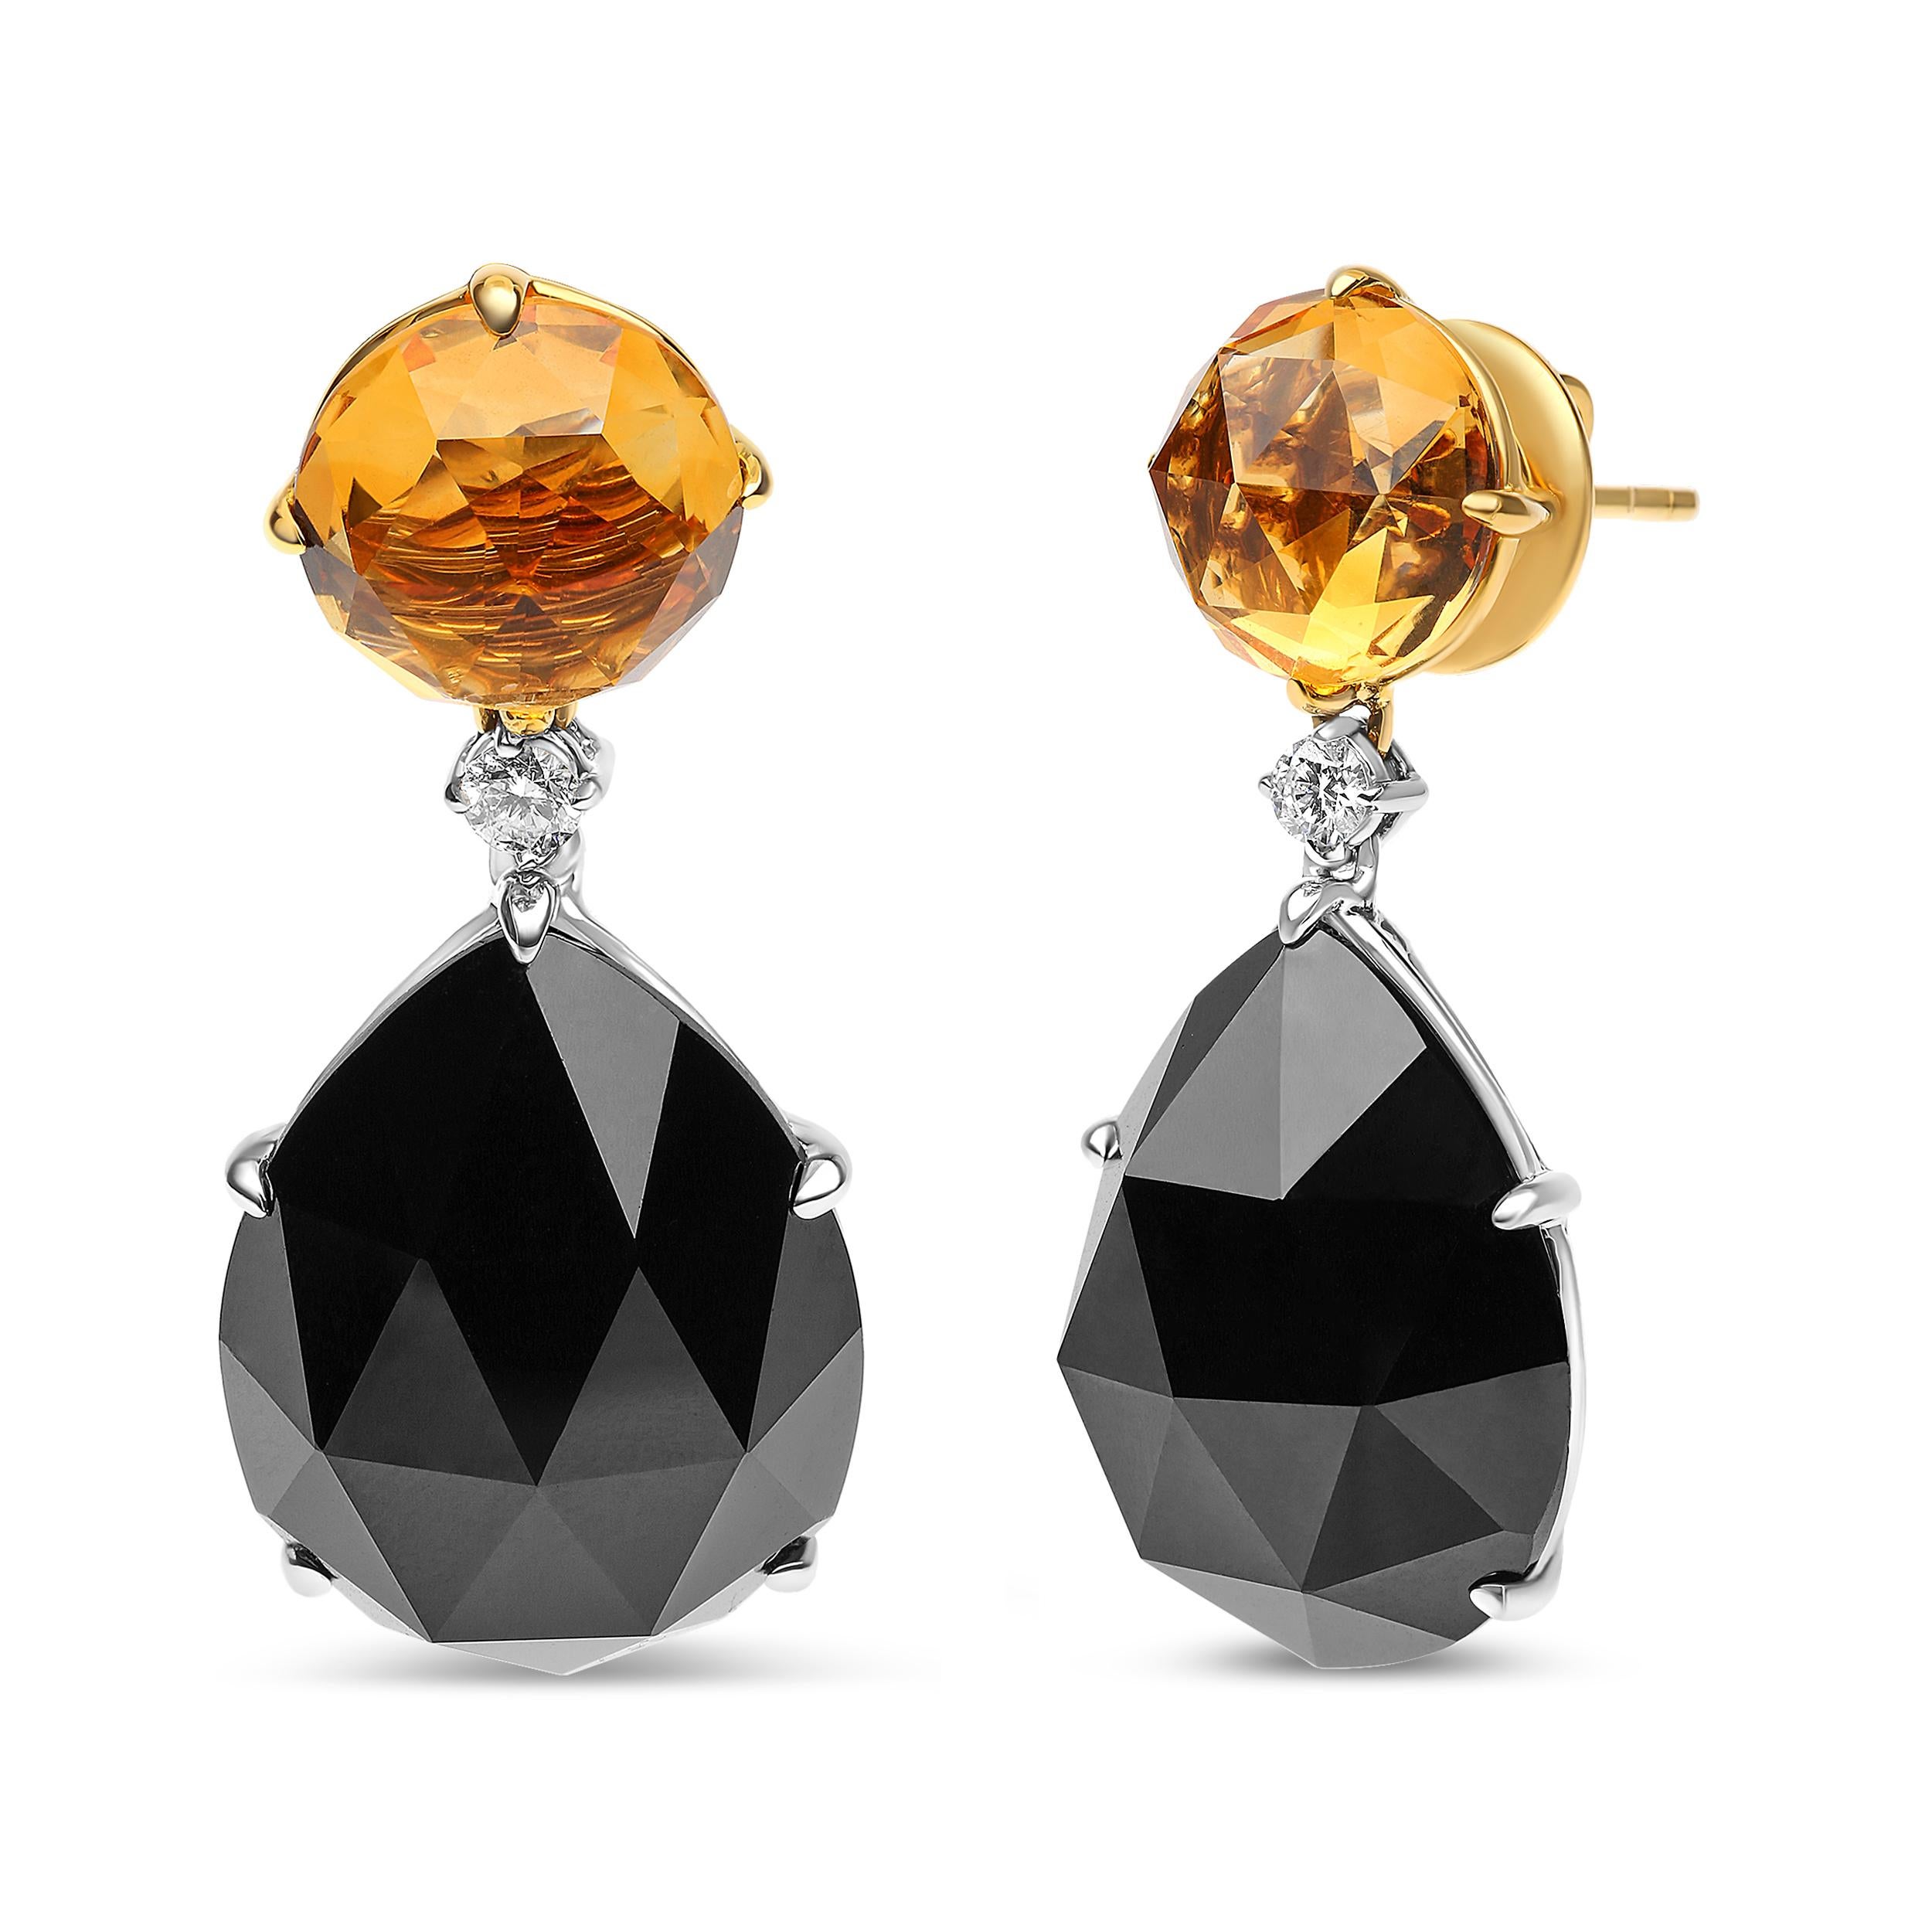 These fashion-forward dangle earrings pose a regal look in genuine 18k white and yellow gold. The graceful design concept centers around natural 20x15mm pear-cut heat-treated black onyx gemstones in prong settings below natural 10x10mm round